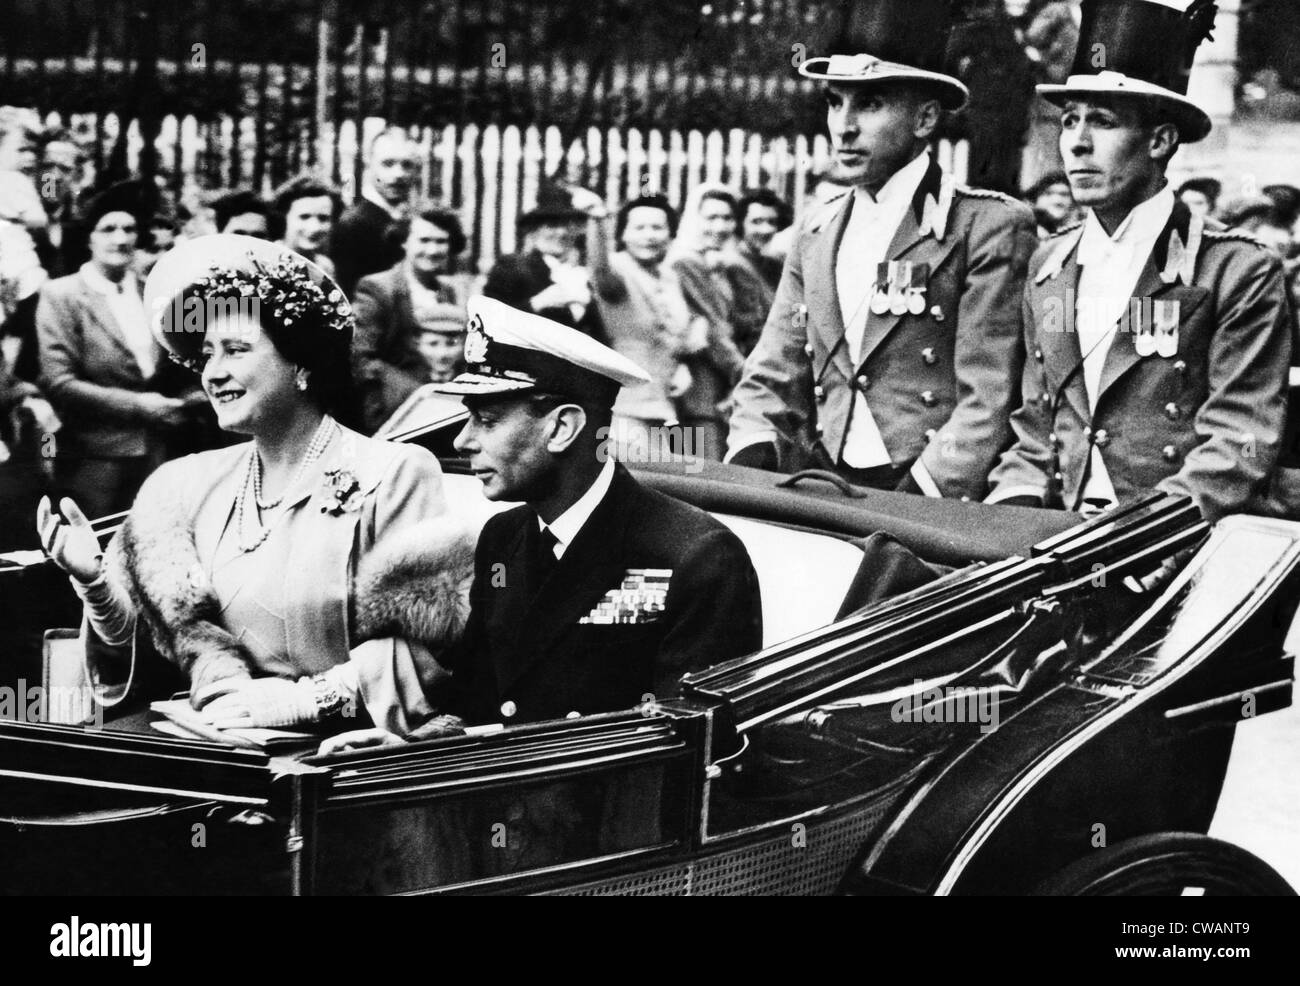 Queen Elizabeth, King George VI, arriving at the Ascot Racetrack in London, 1947.. Courtesy: CSU Archives / Everett Collection Stock Photo